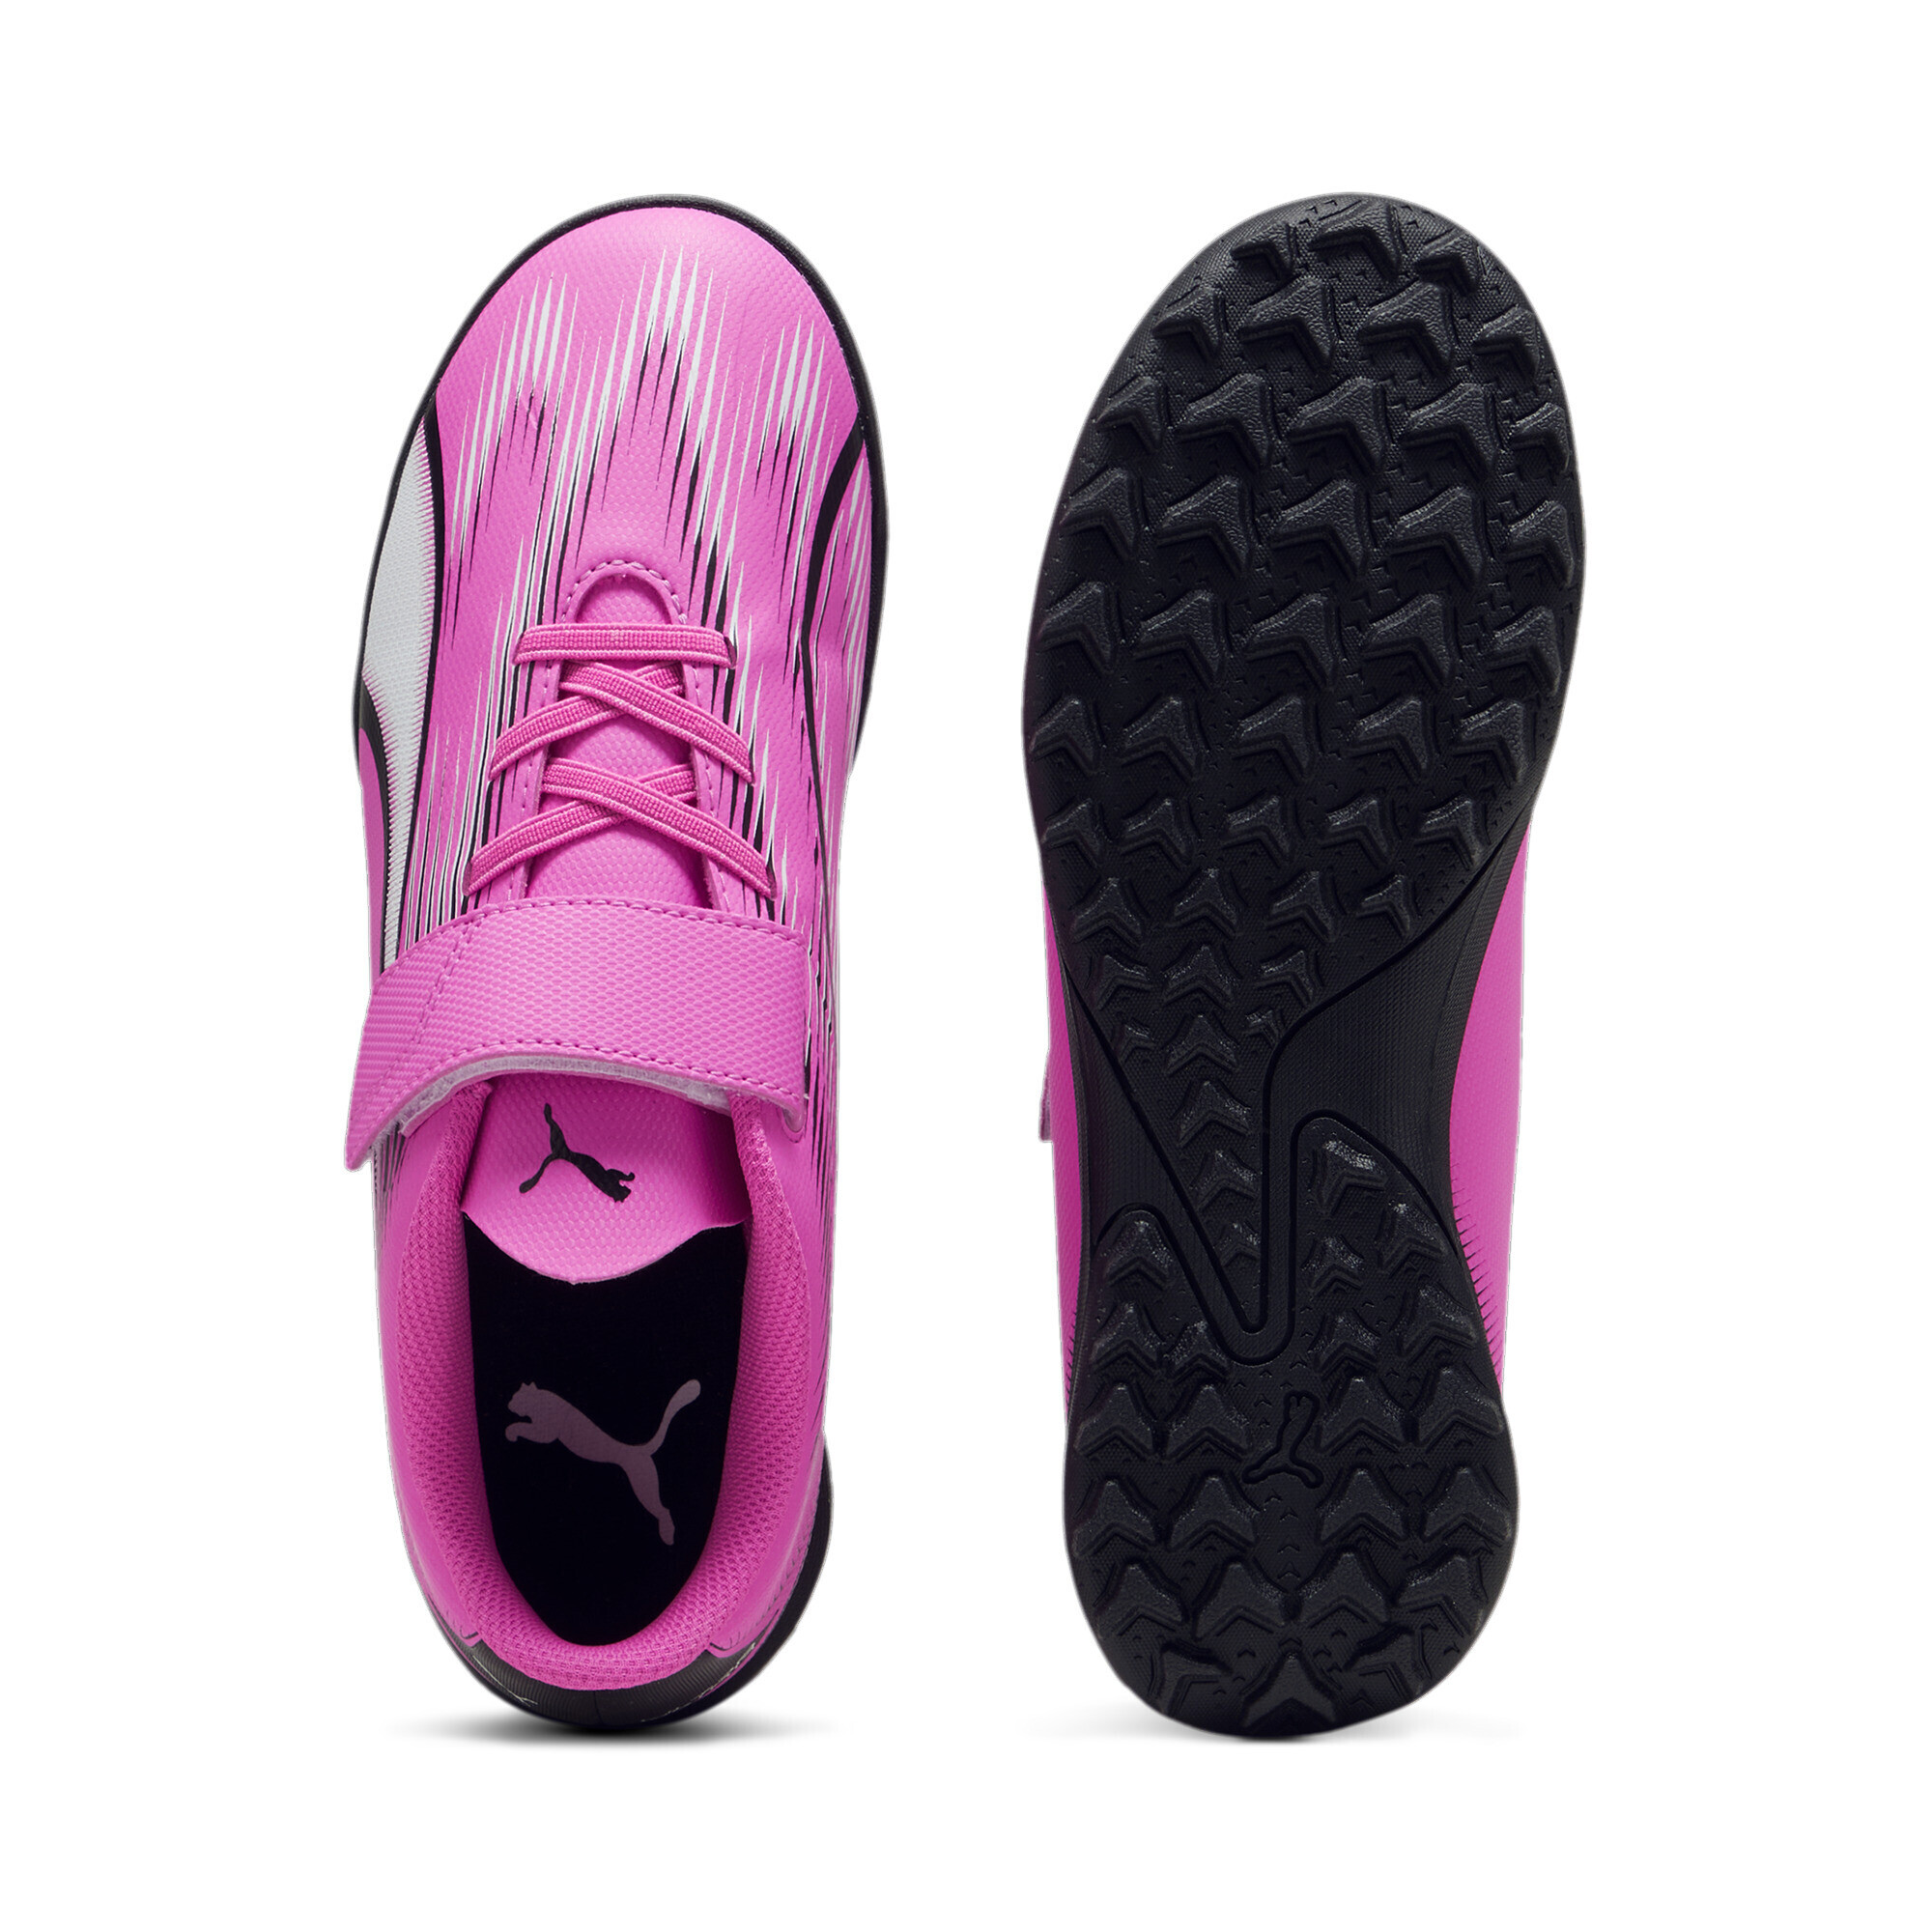 PUMA ULTRA PLAY TT Youth Football Boots In Pink, Size EU 31